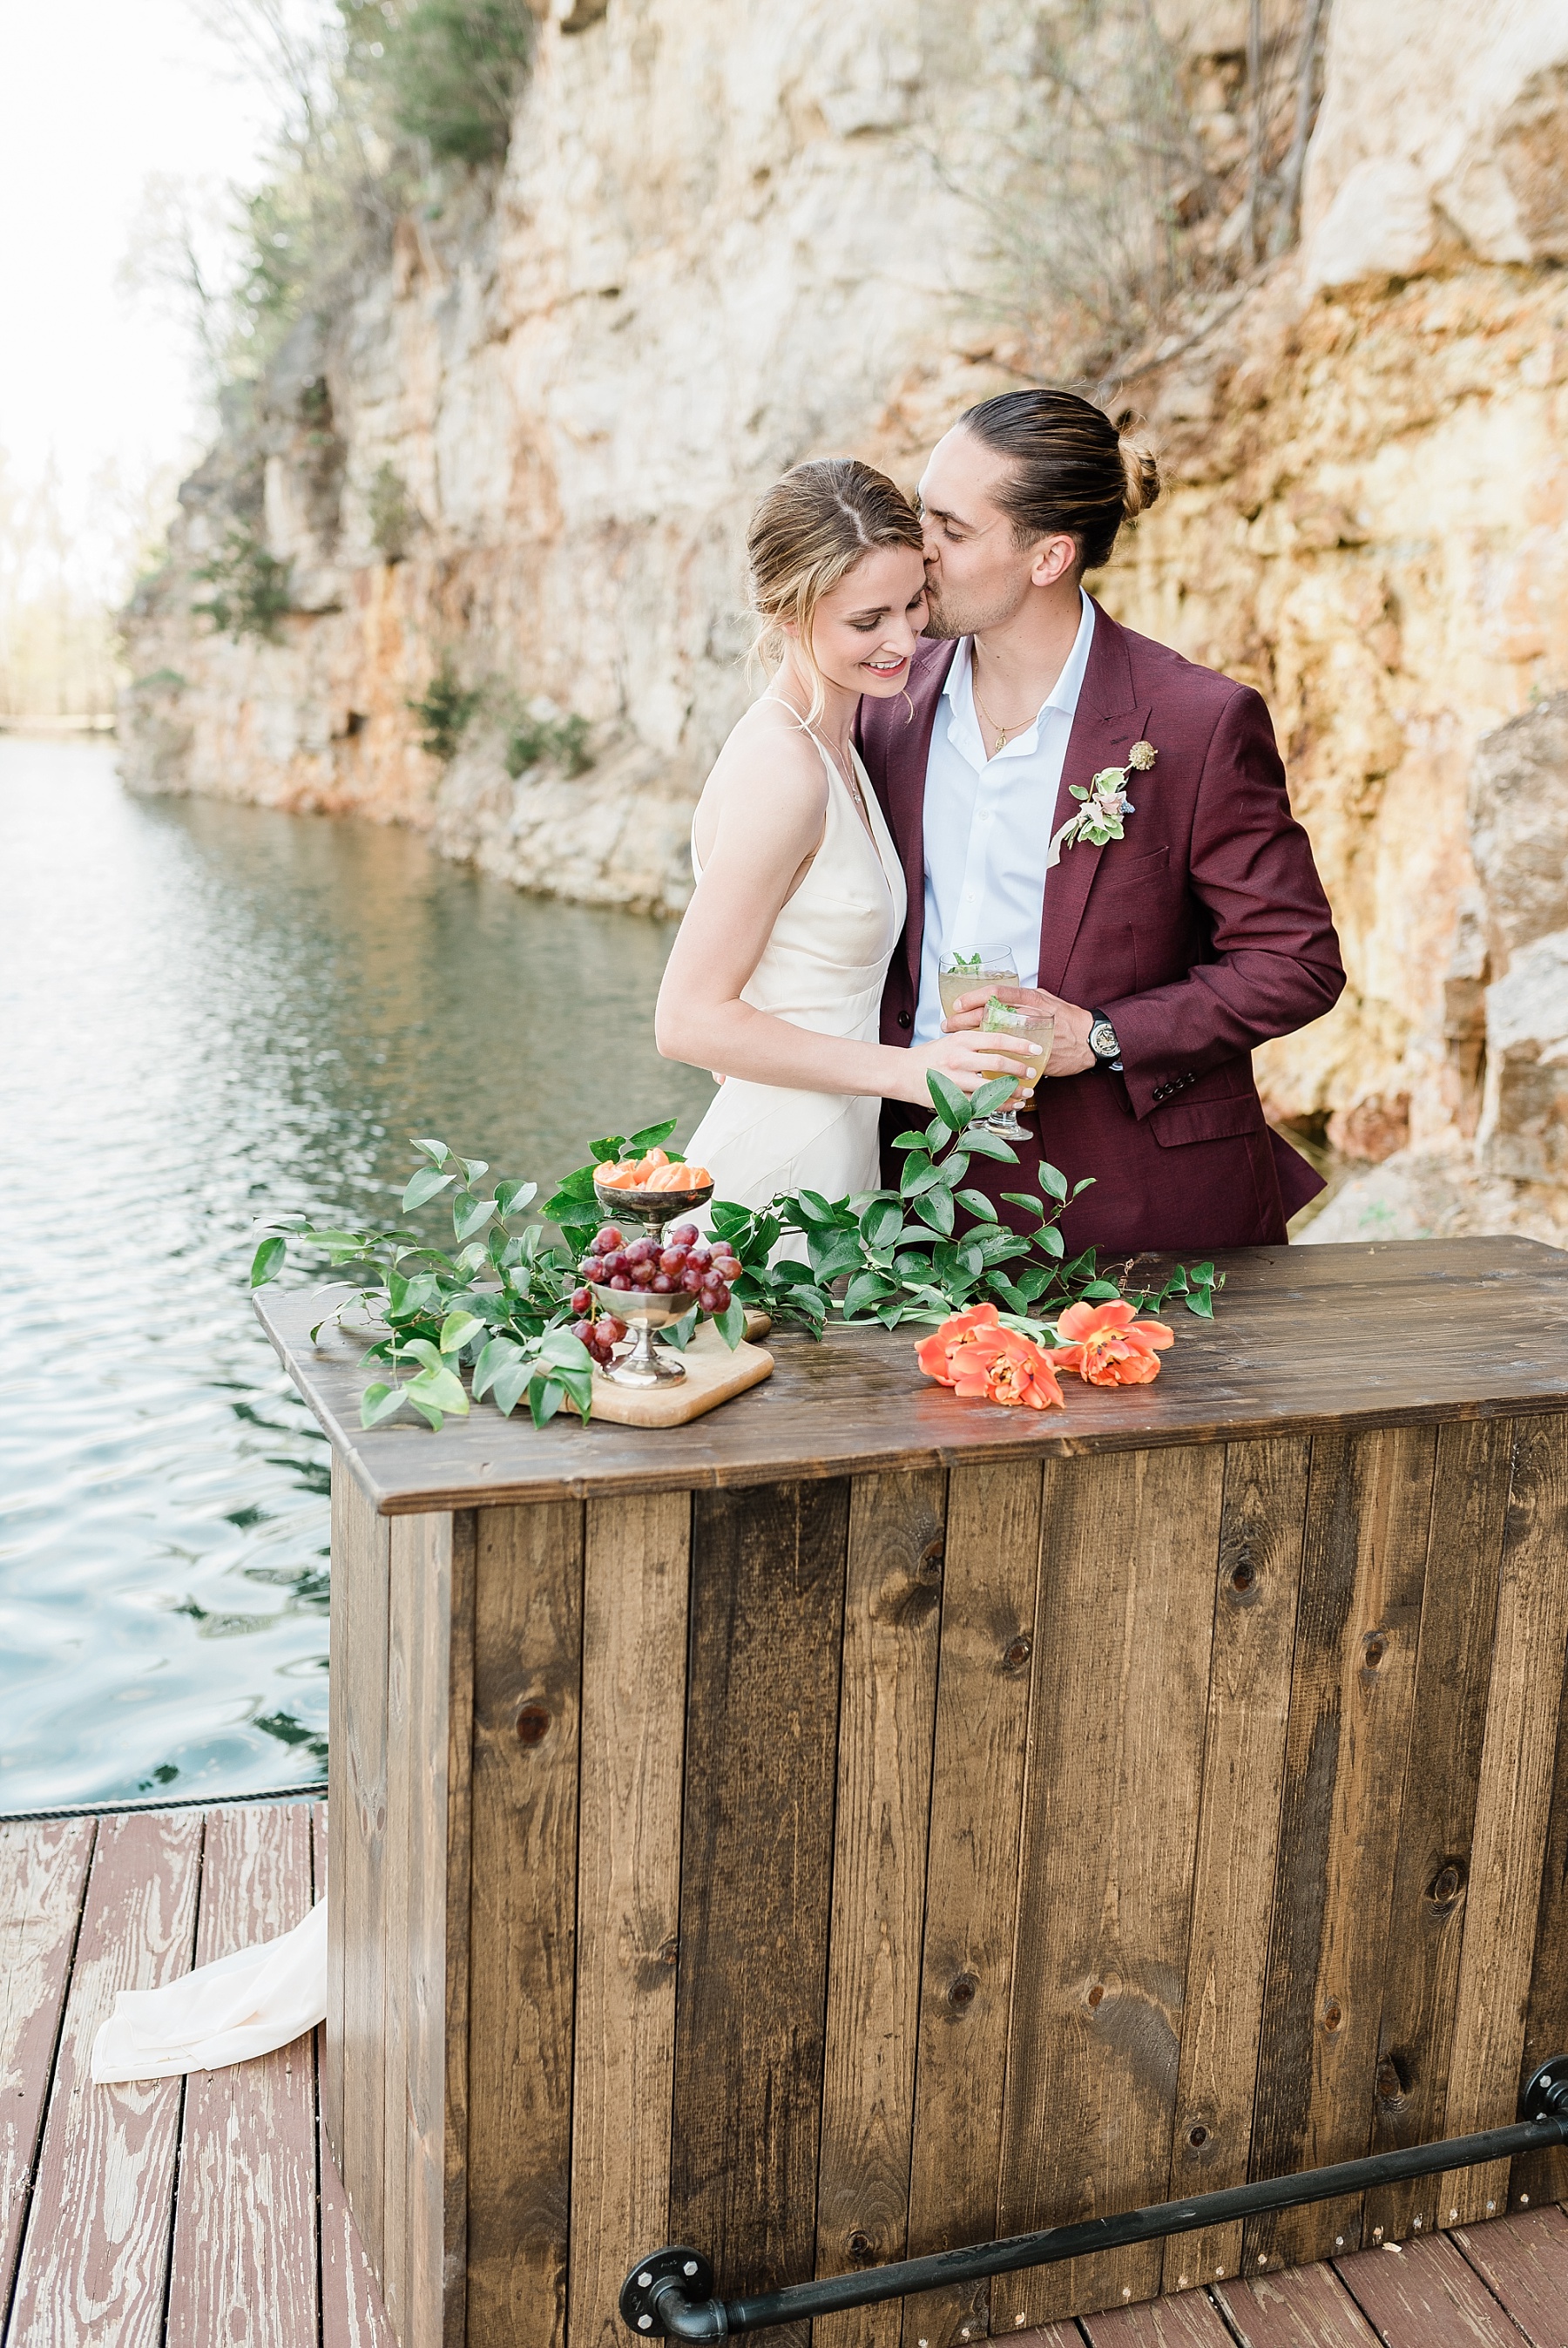 Intimate Spanish and French Inspired Destination Wedding with Lakeside Dinner Party at Dusk at Wildcliff by Kelsi Kliethermes Photography Best Missouri and Maui Wedding Photographer_0061.jpg